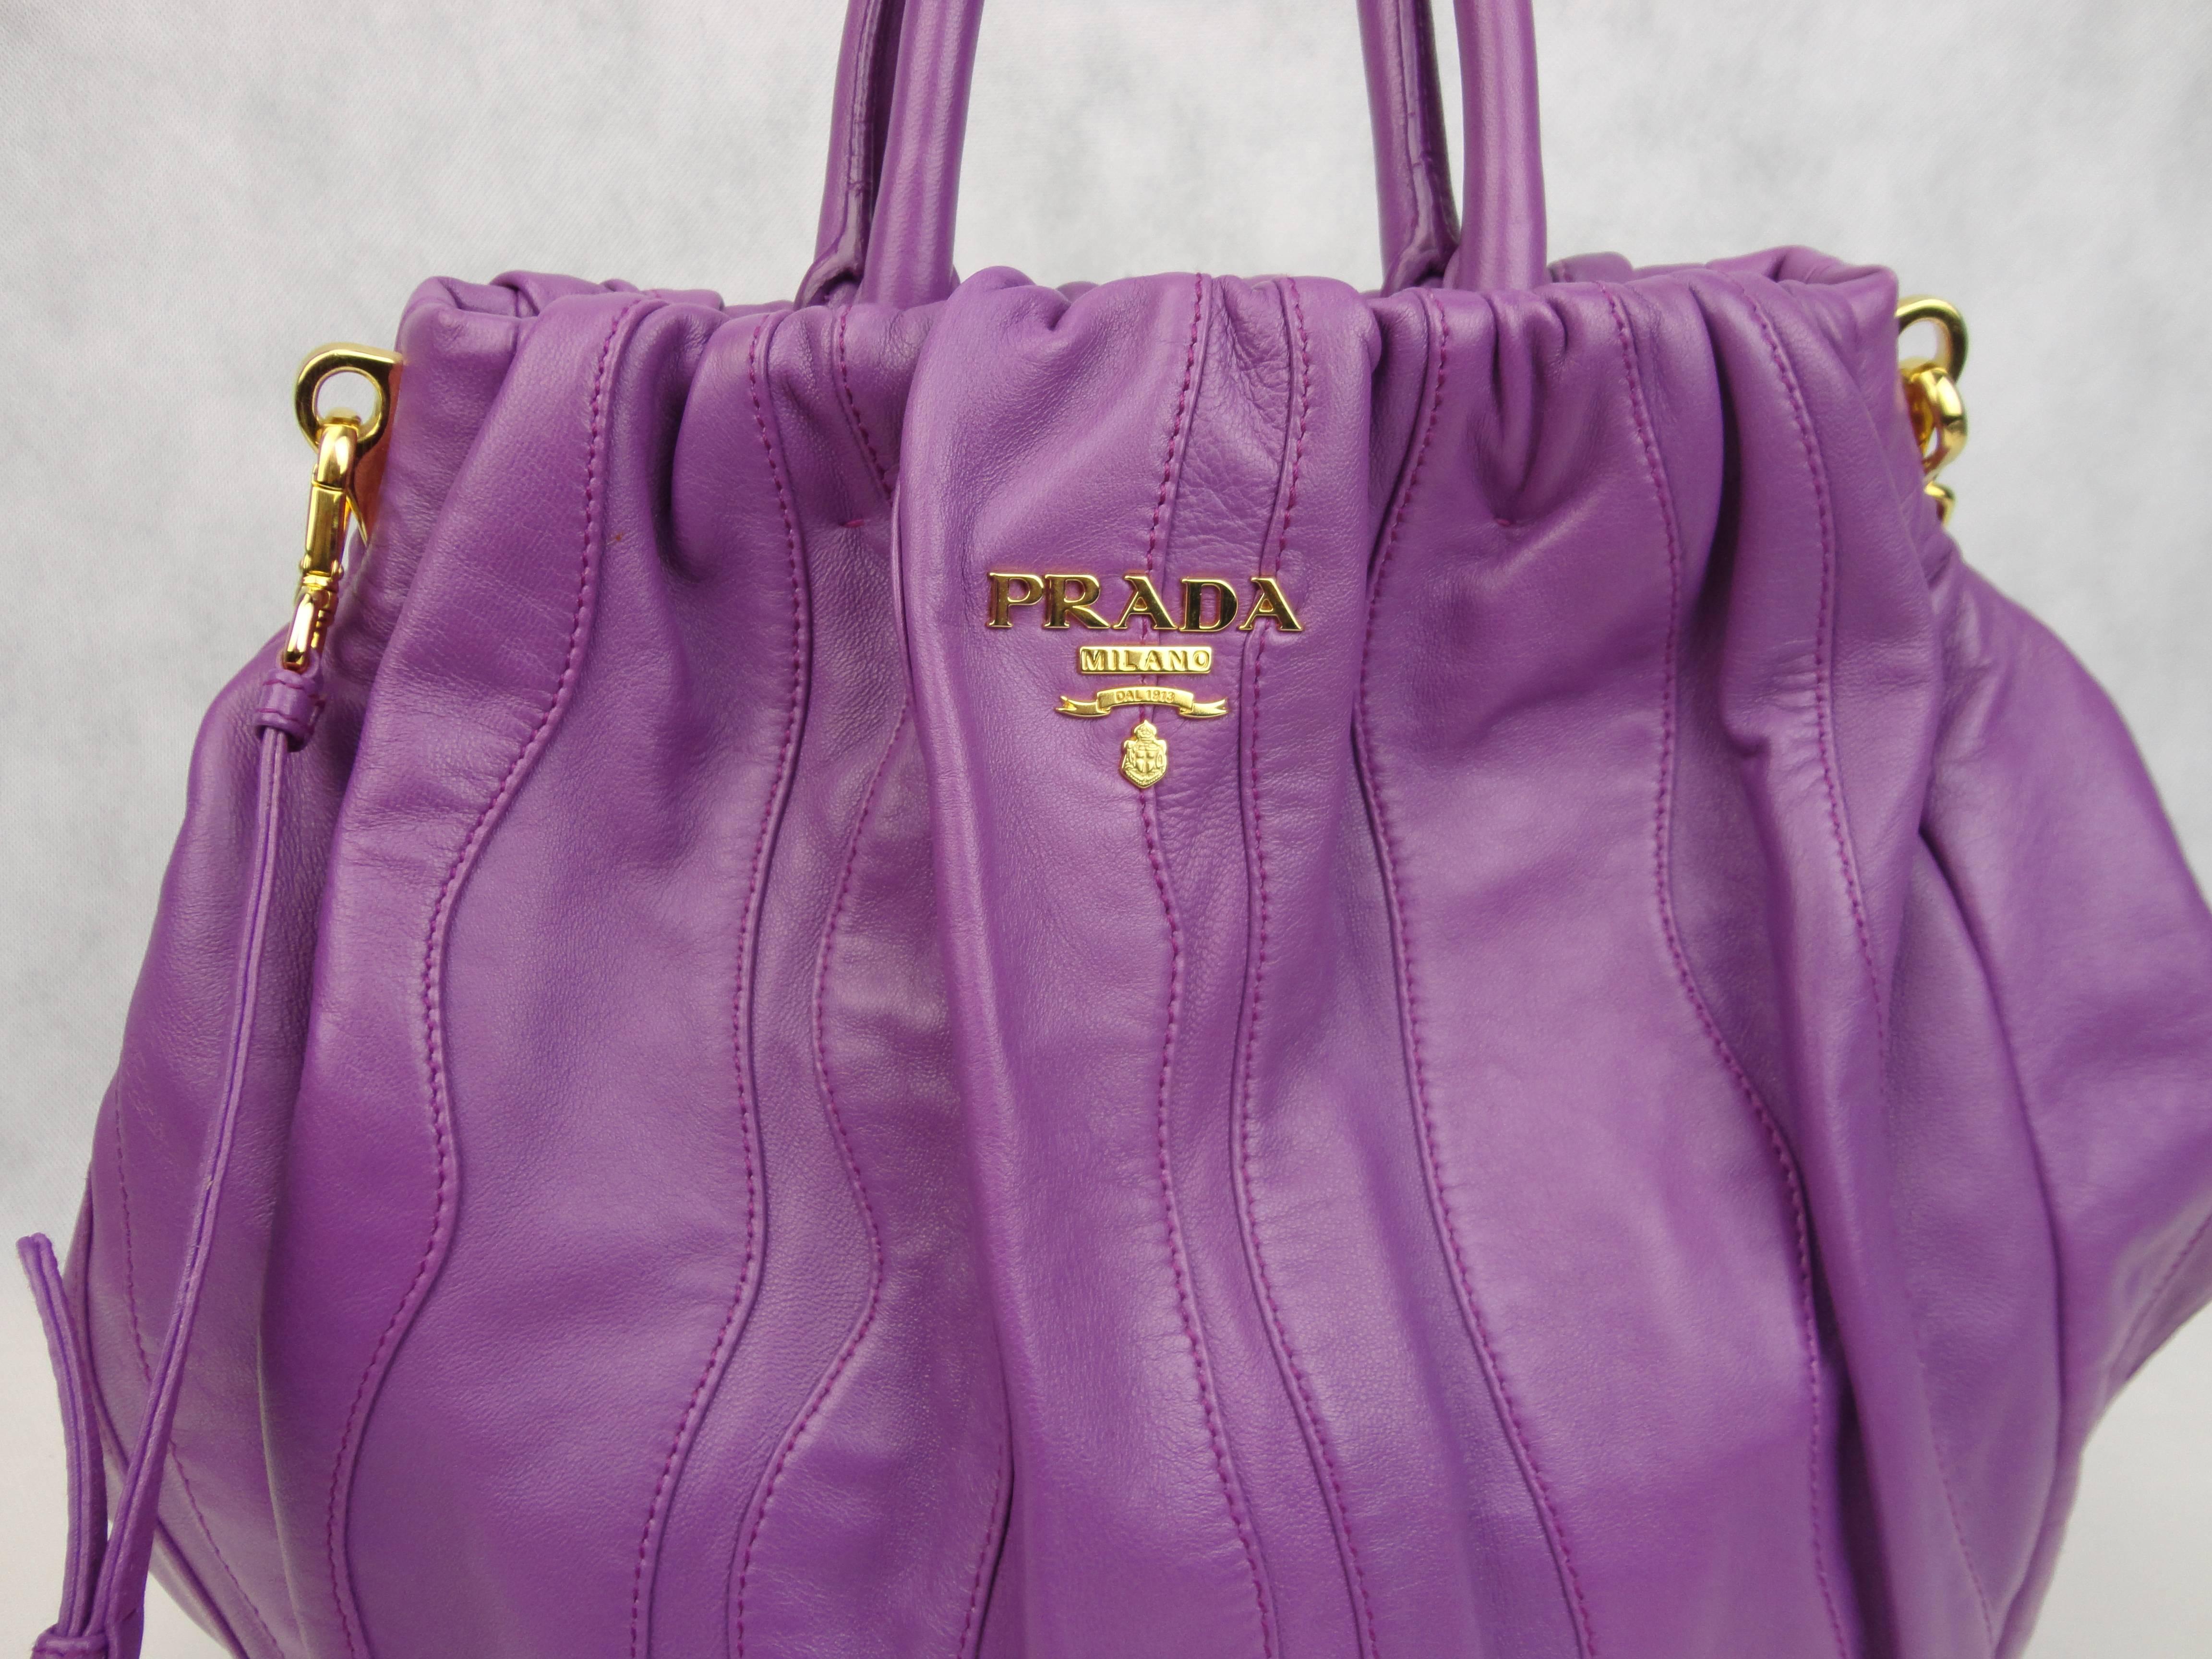 Hard to find Prada anemone nappa leather stripes tote, from the famous 2008 fairy collection.
This Prada tote has gold tone hardware, logo at the front, two rolled handles, removable shoulder or crossbody strap and is fully lined in very smooth